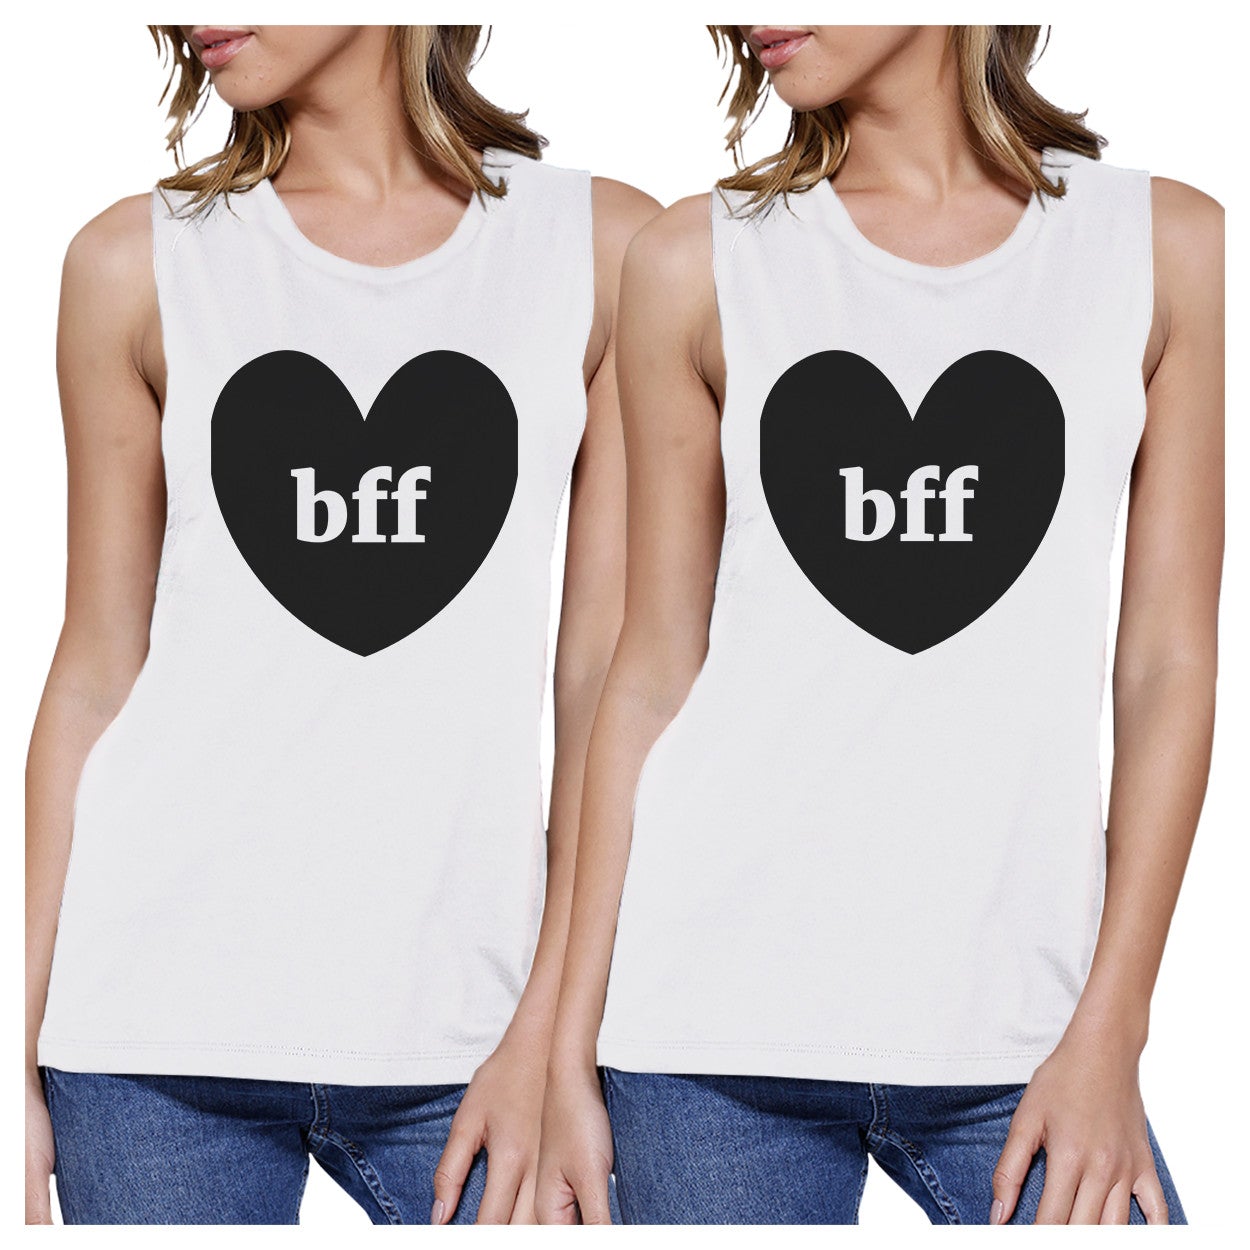 Bff Hearts BFF Matching White Muscle Tops